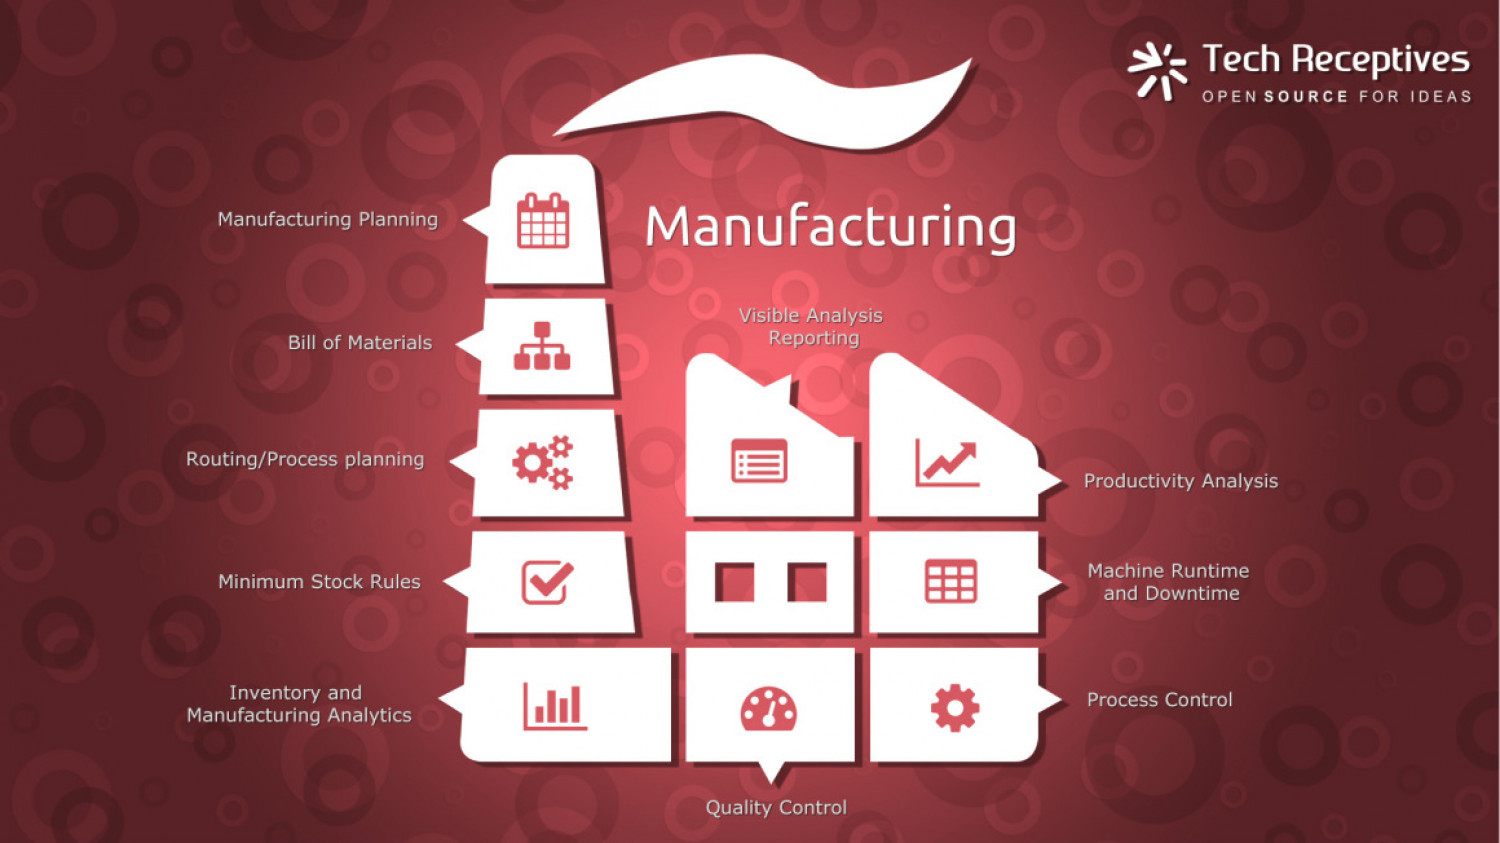 Odoo ERP Manufucturing System Solution Infographic - Tech Receptives Infographic